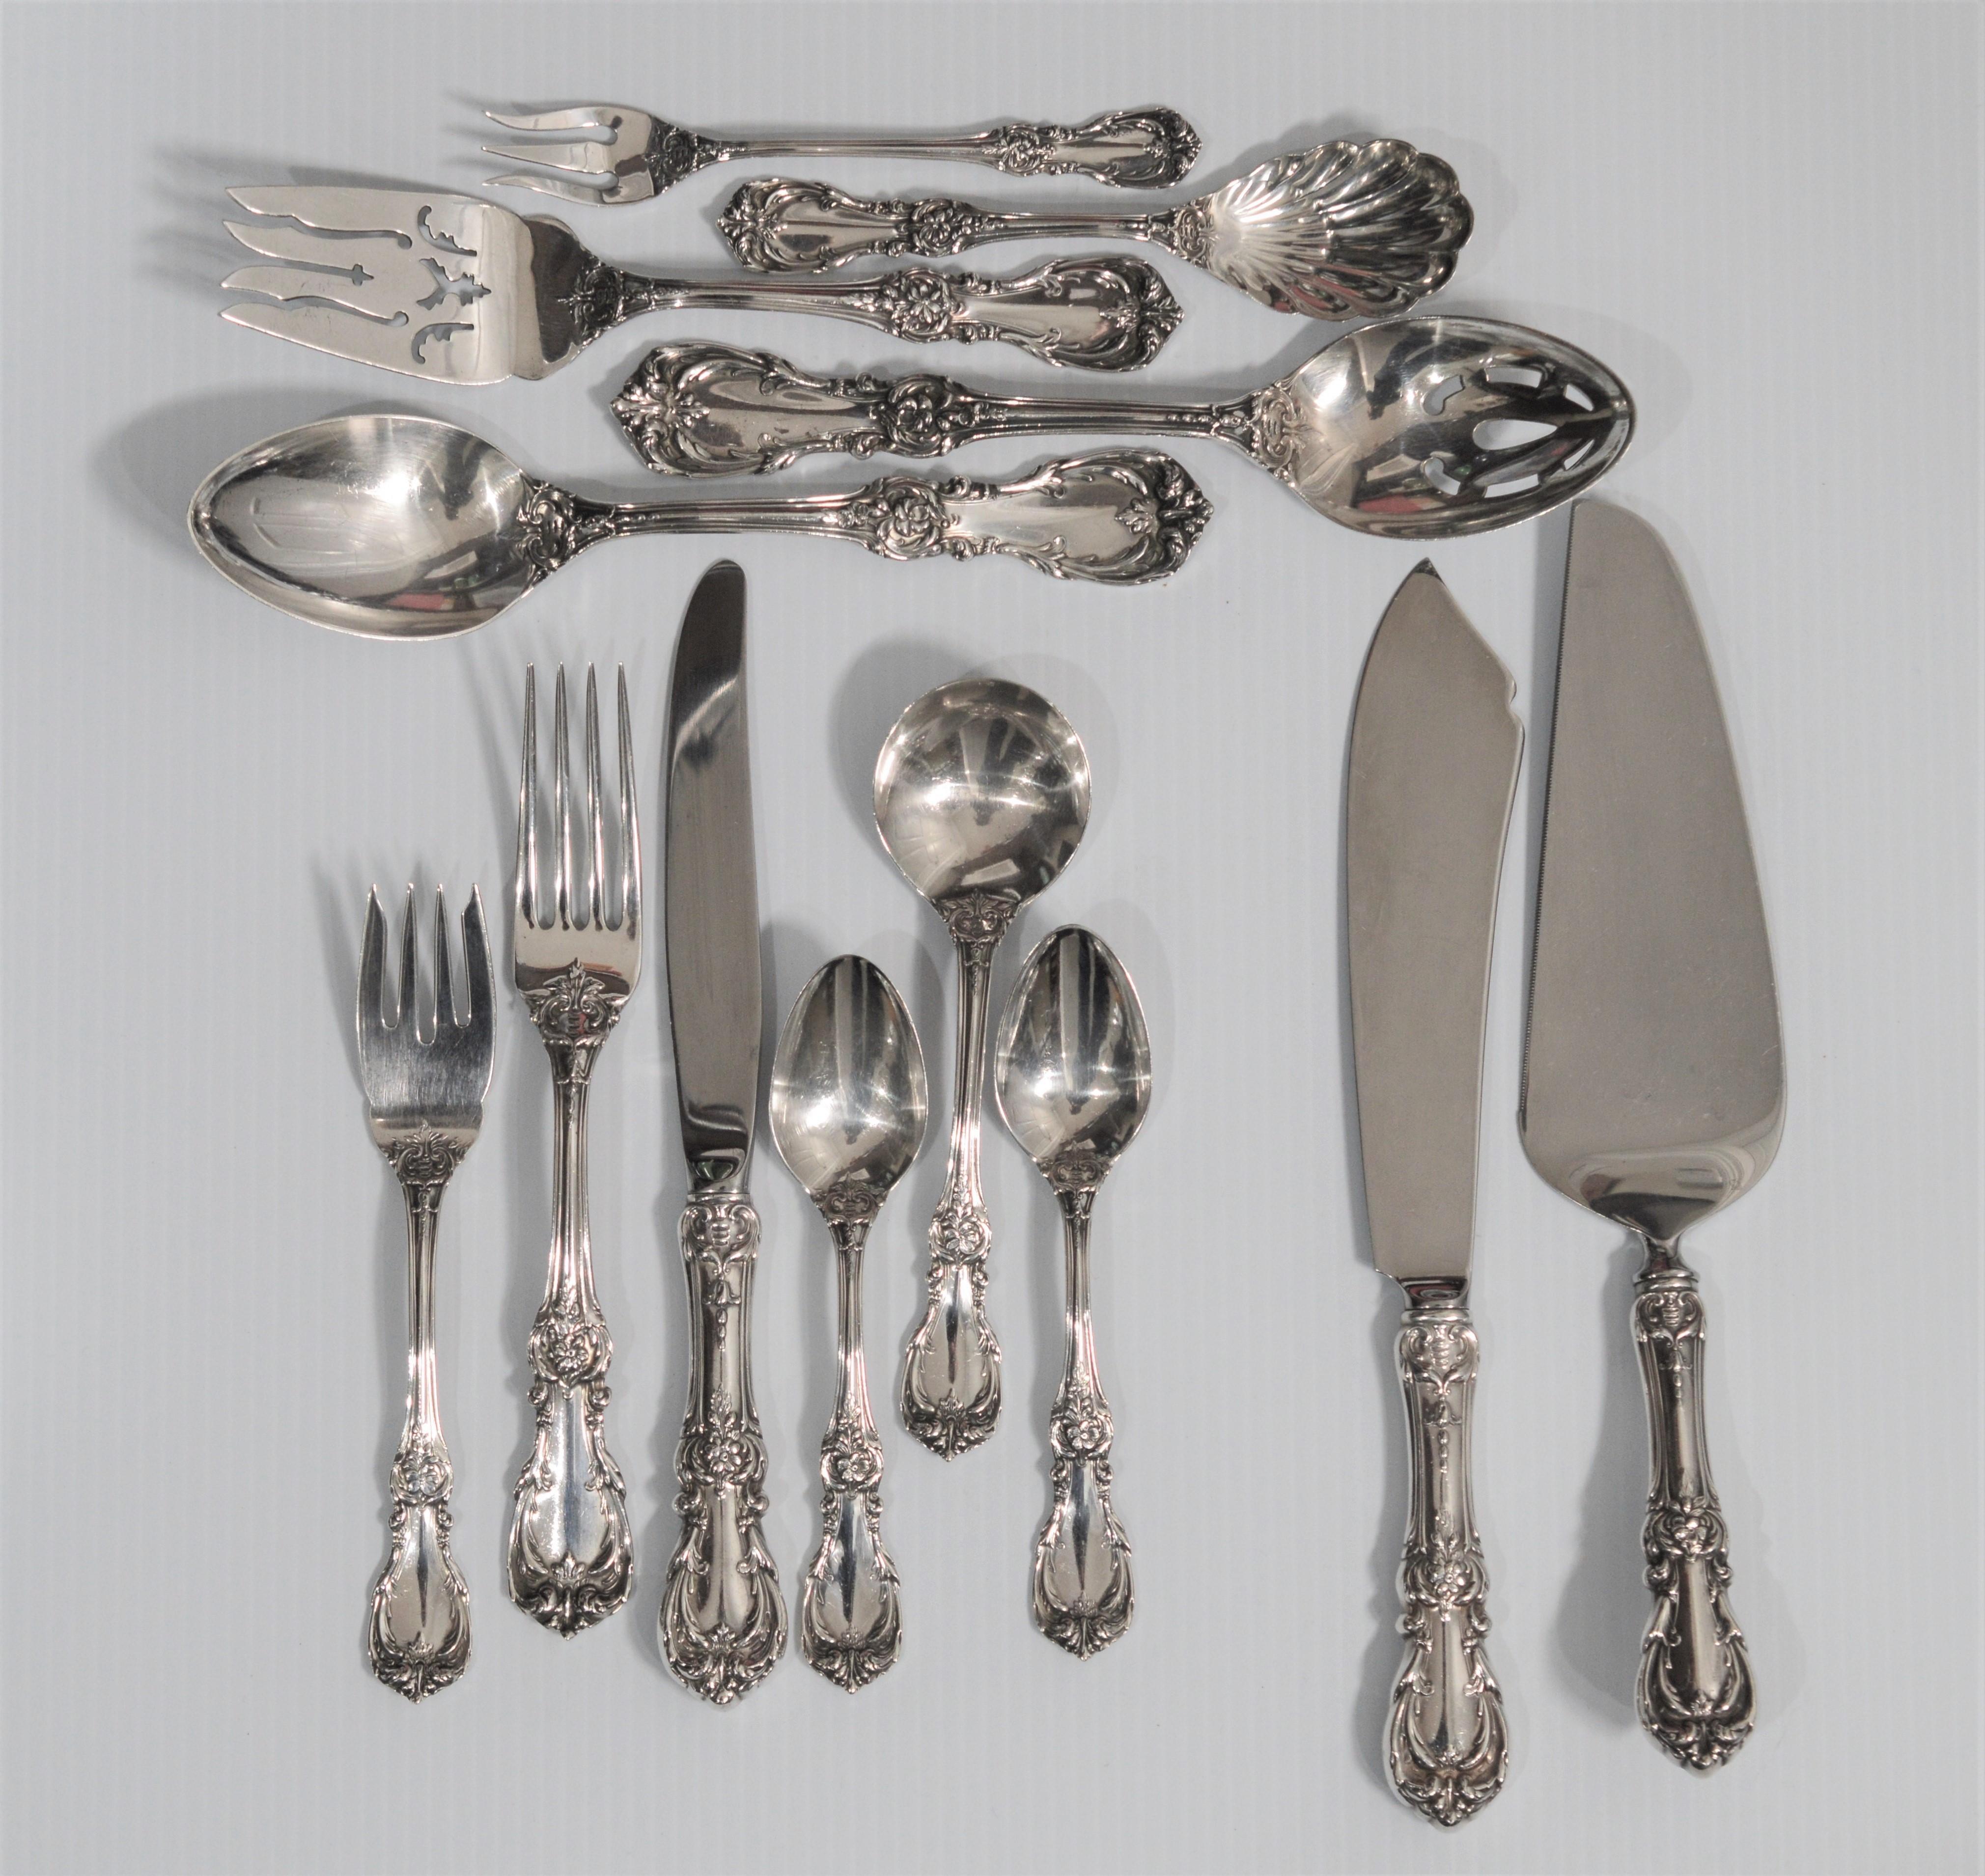 Reed & Barton Burgundy Sterling Silver 6 Piece Flatware Set - Service for 12 -plus seven matching serving utensils. ( Total 79 Pieces)
Each (6) piece place setting includes; One Salad Fork, One Dinner Fork, One Dinner Knife, One Soup Spoon and Two